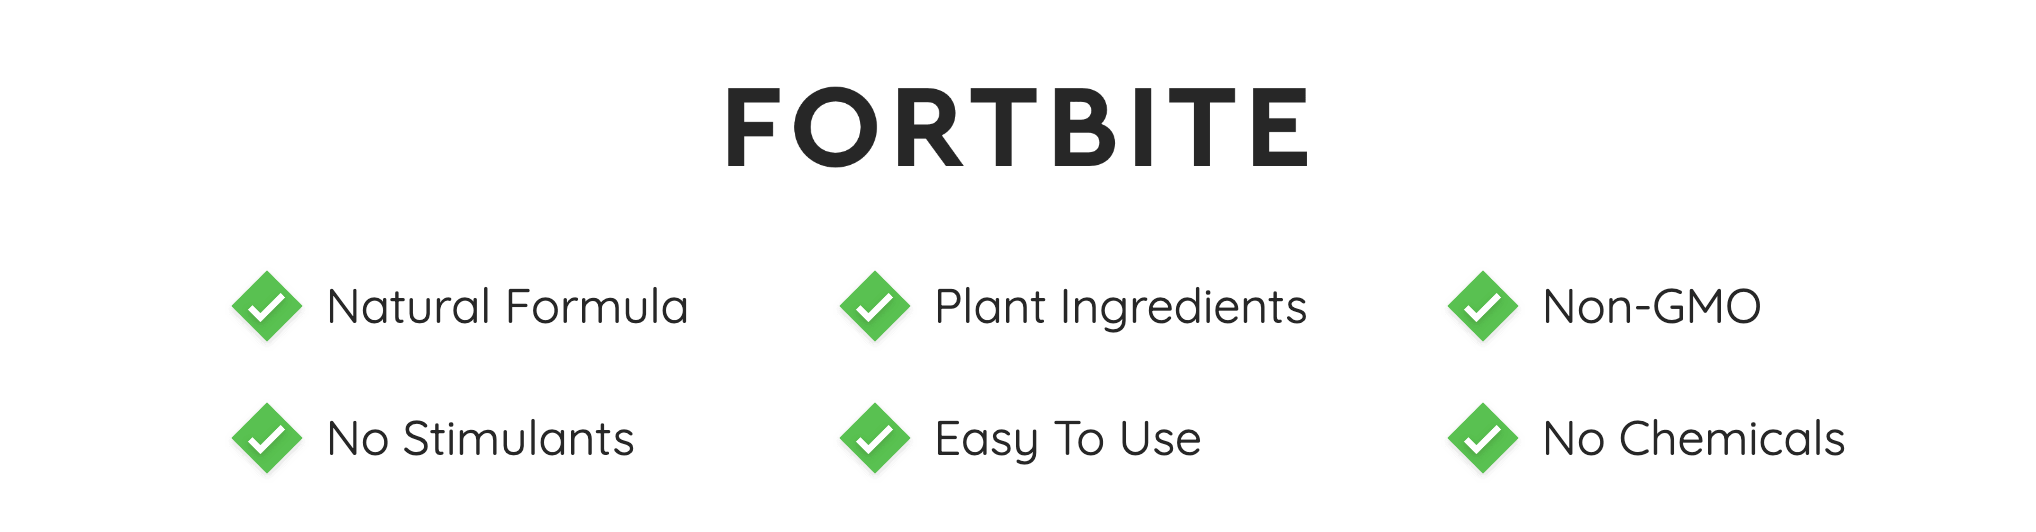 fortbite supplement facts